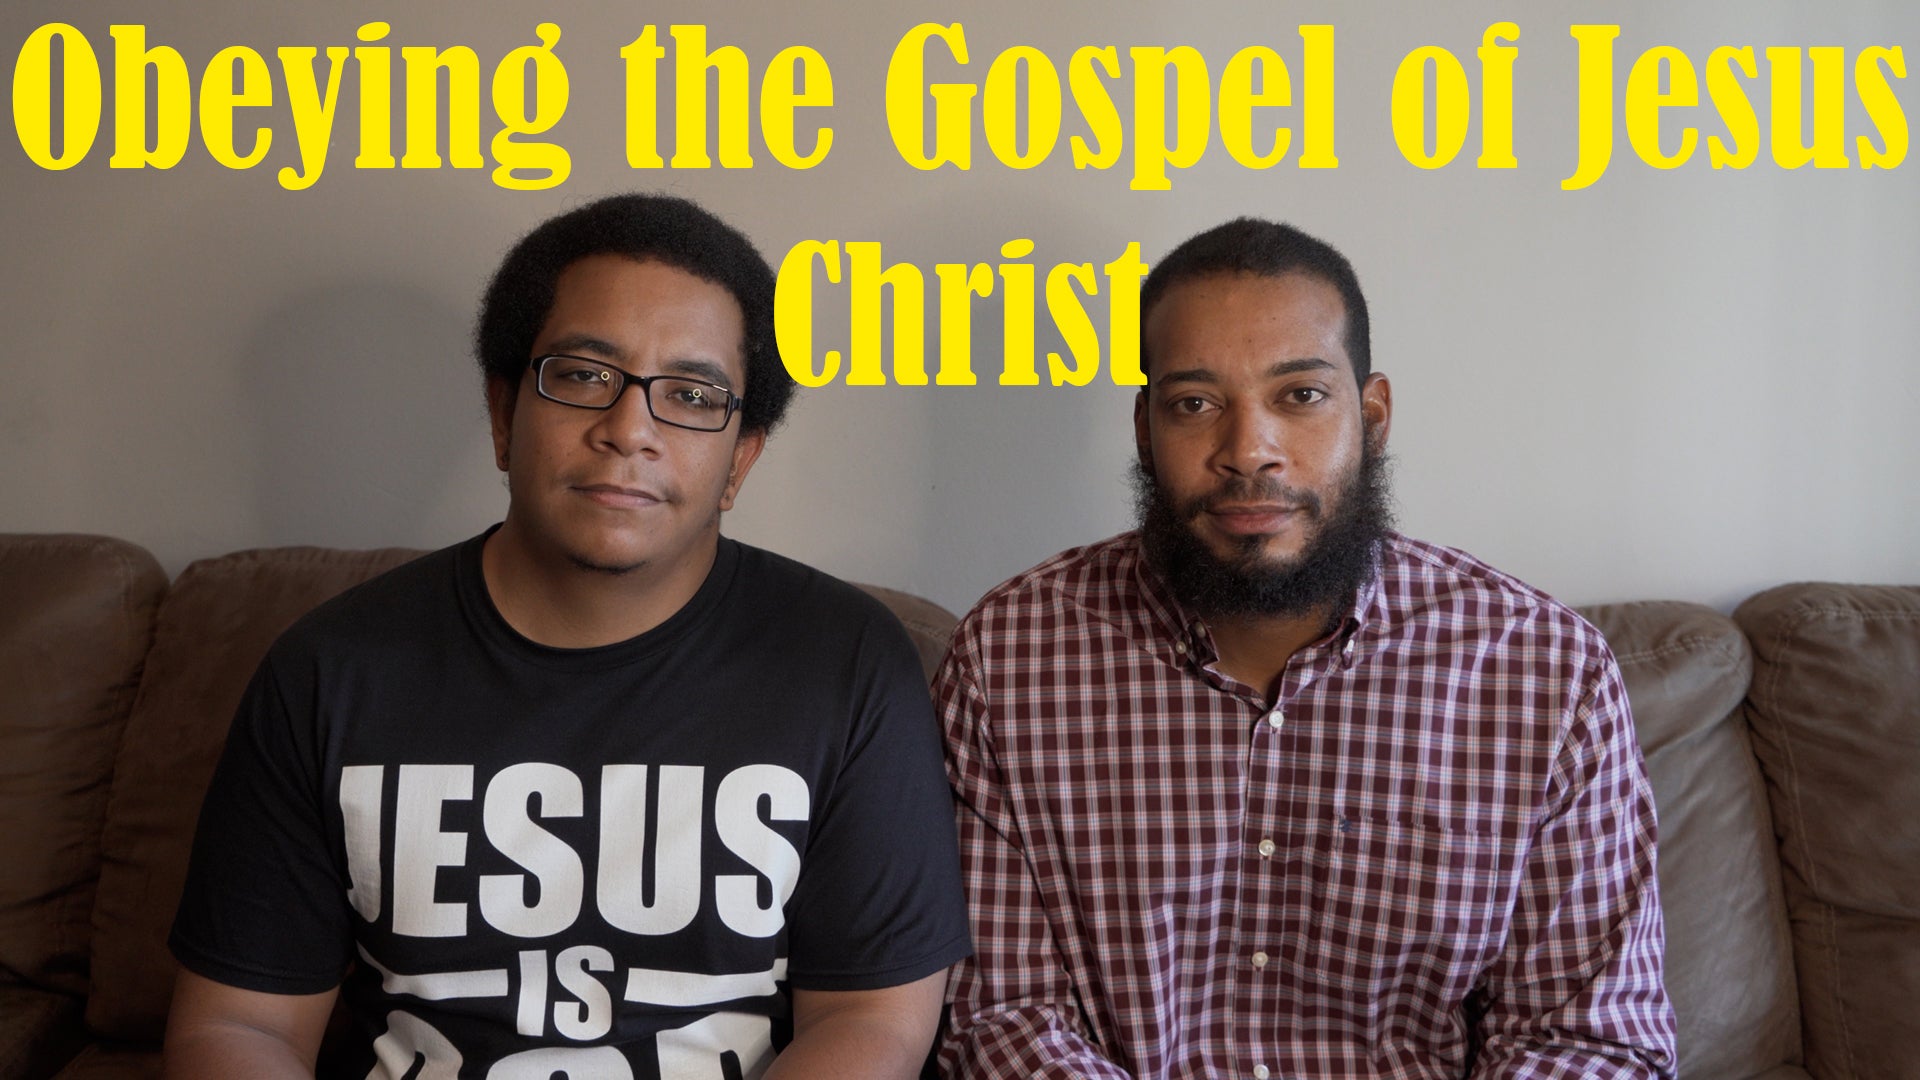 Load video: Obeying the Gospel of Jesus Christ